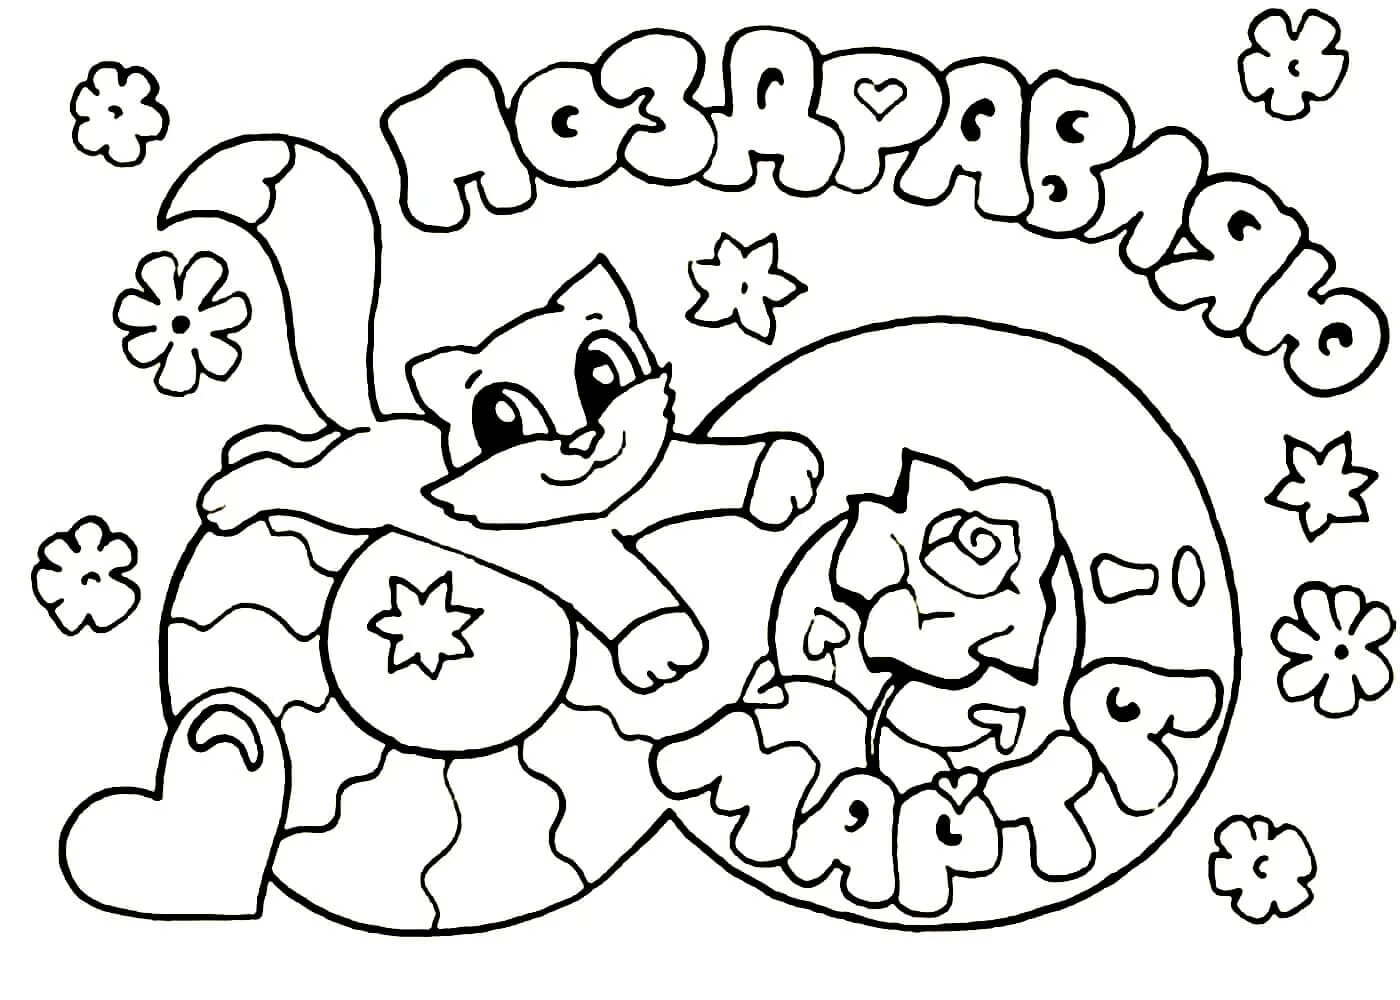 Coloring card for minors